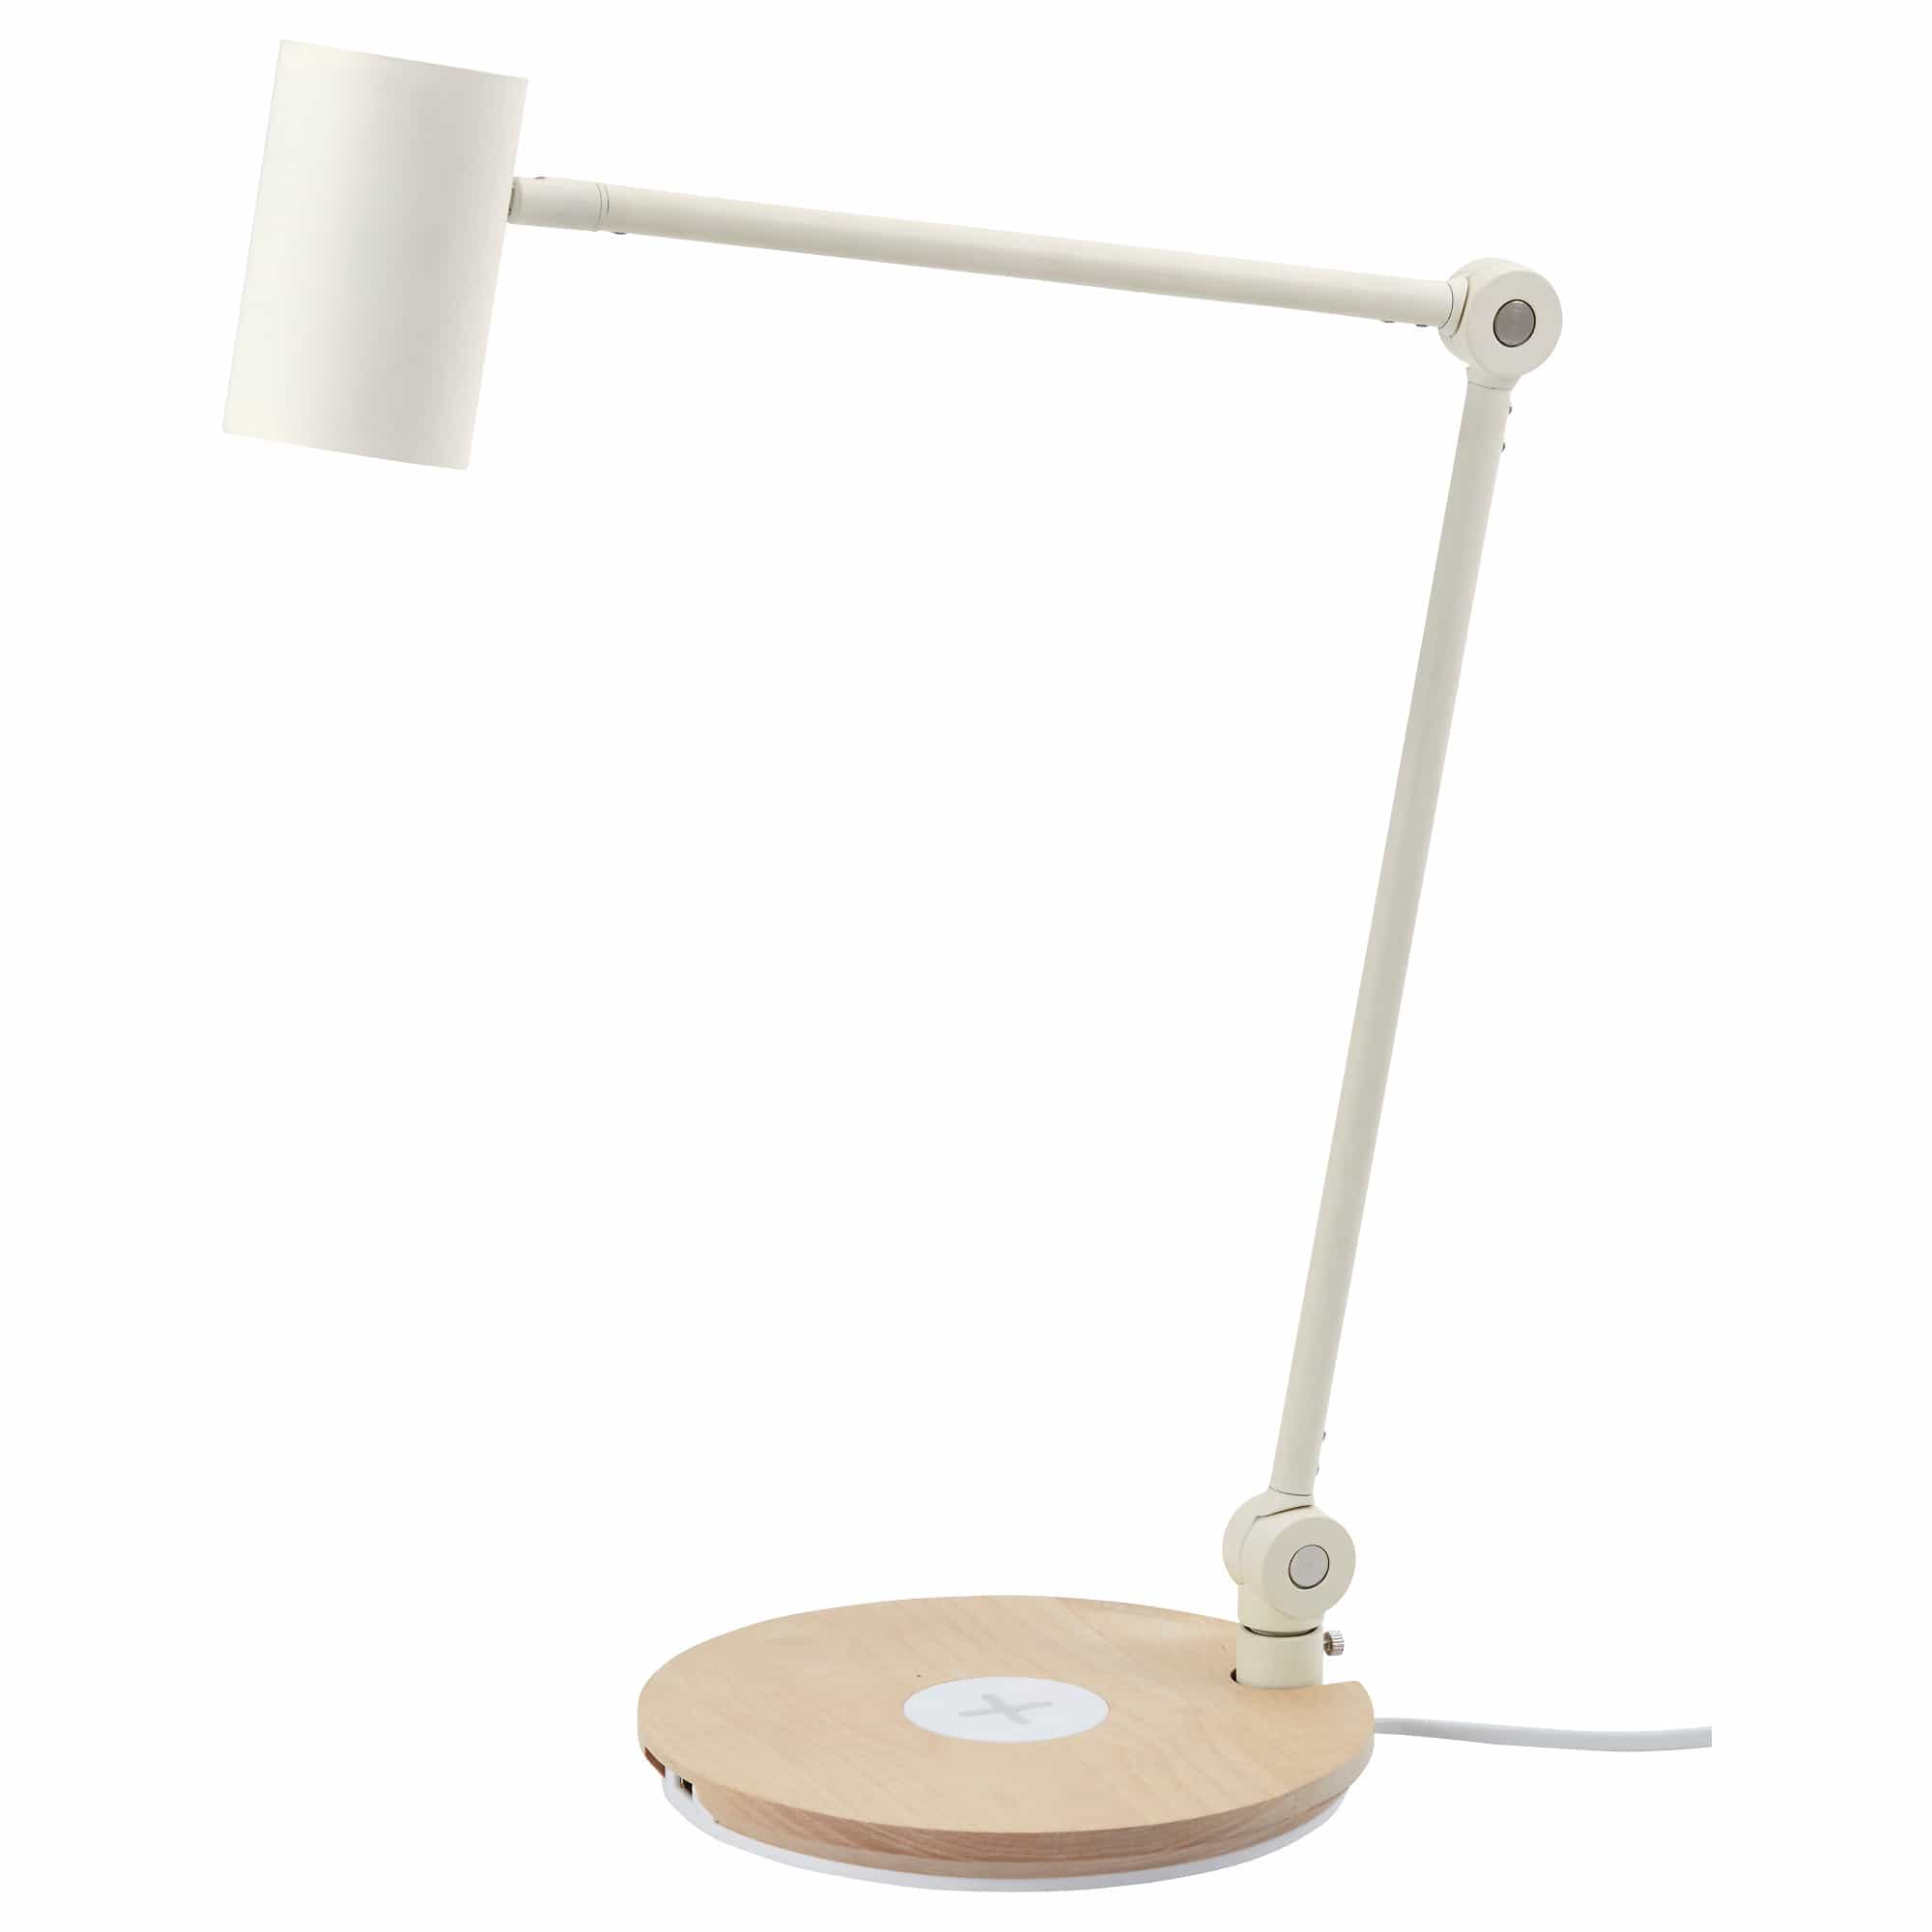 Ikea Riggad wireless charger lamp